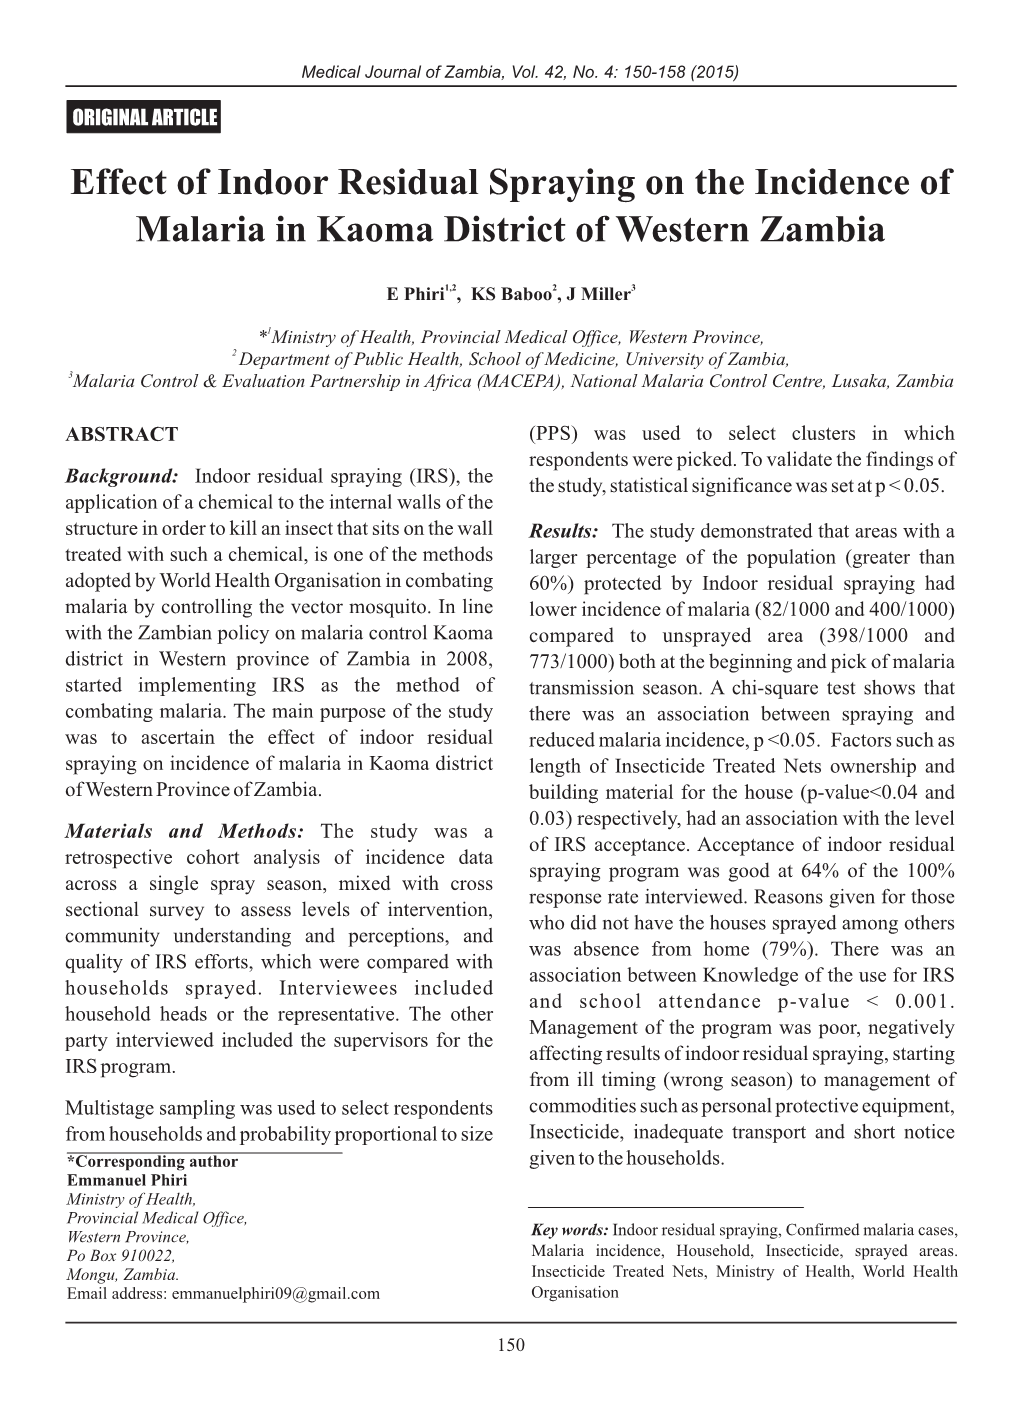 2. Effect of Indoor Residual Spraying on the Incidence of Malaria